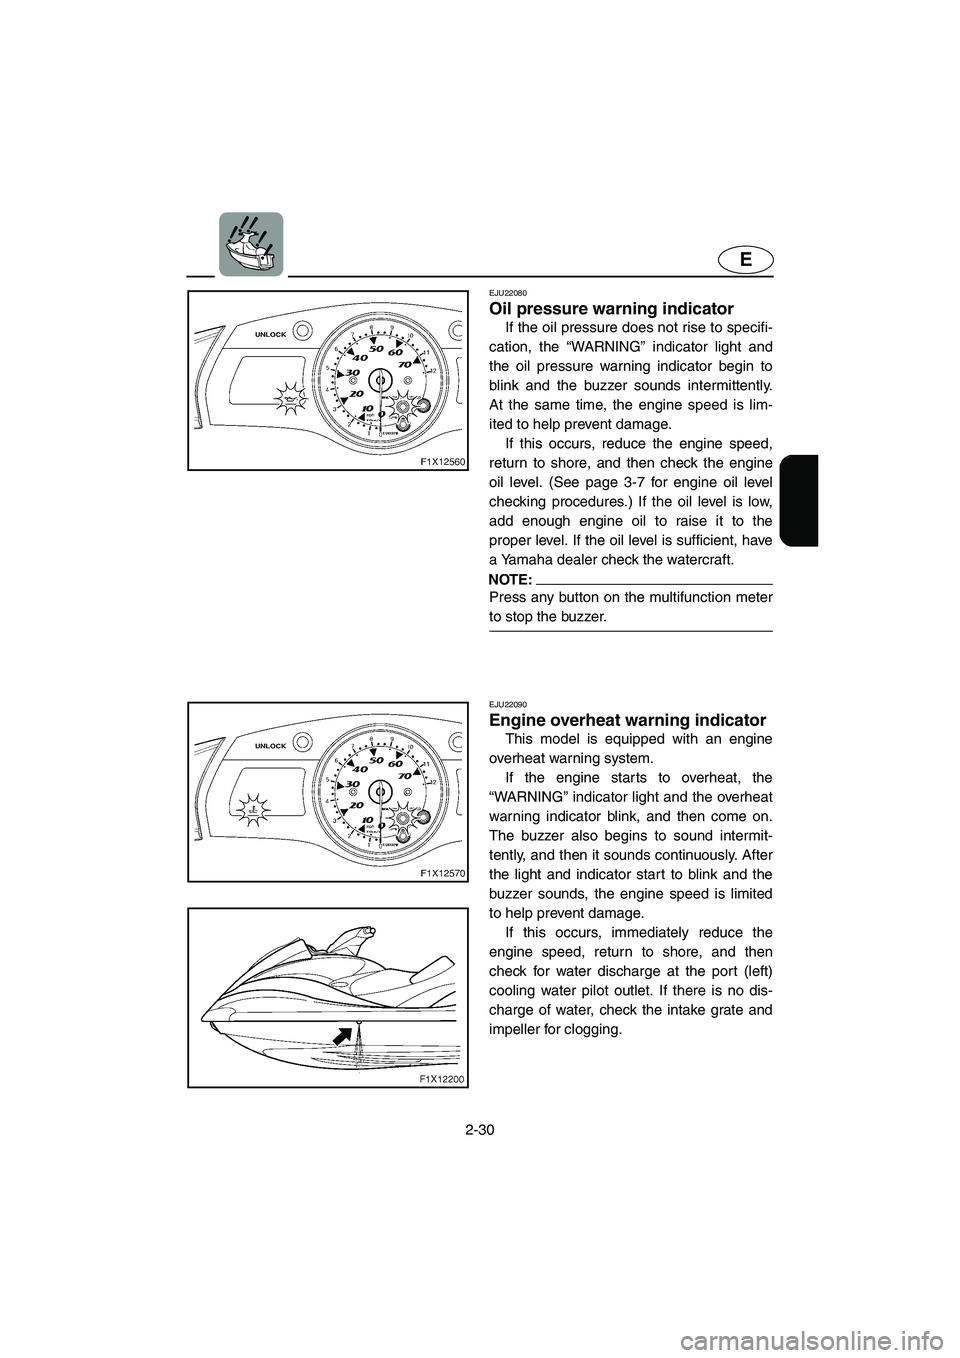 YAMAHA FX HO 2006  Owners Manual 2-30
E
EJU22080 
Oil pressure warning indicator 
If the oil pressure does not rise to specifi-
cation, the “WARNING” indicator light and
the oil pressure warning indicator begin to
blink and the b